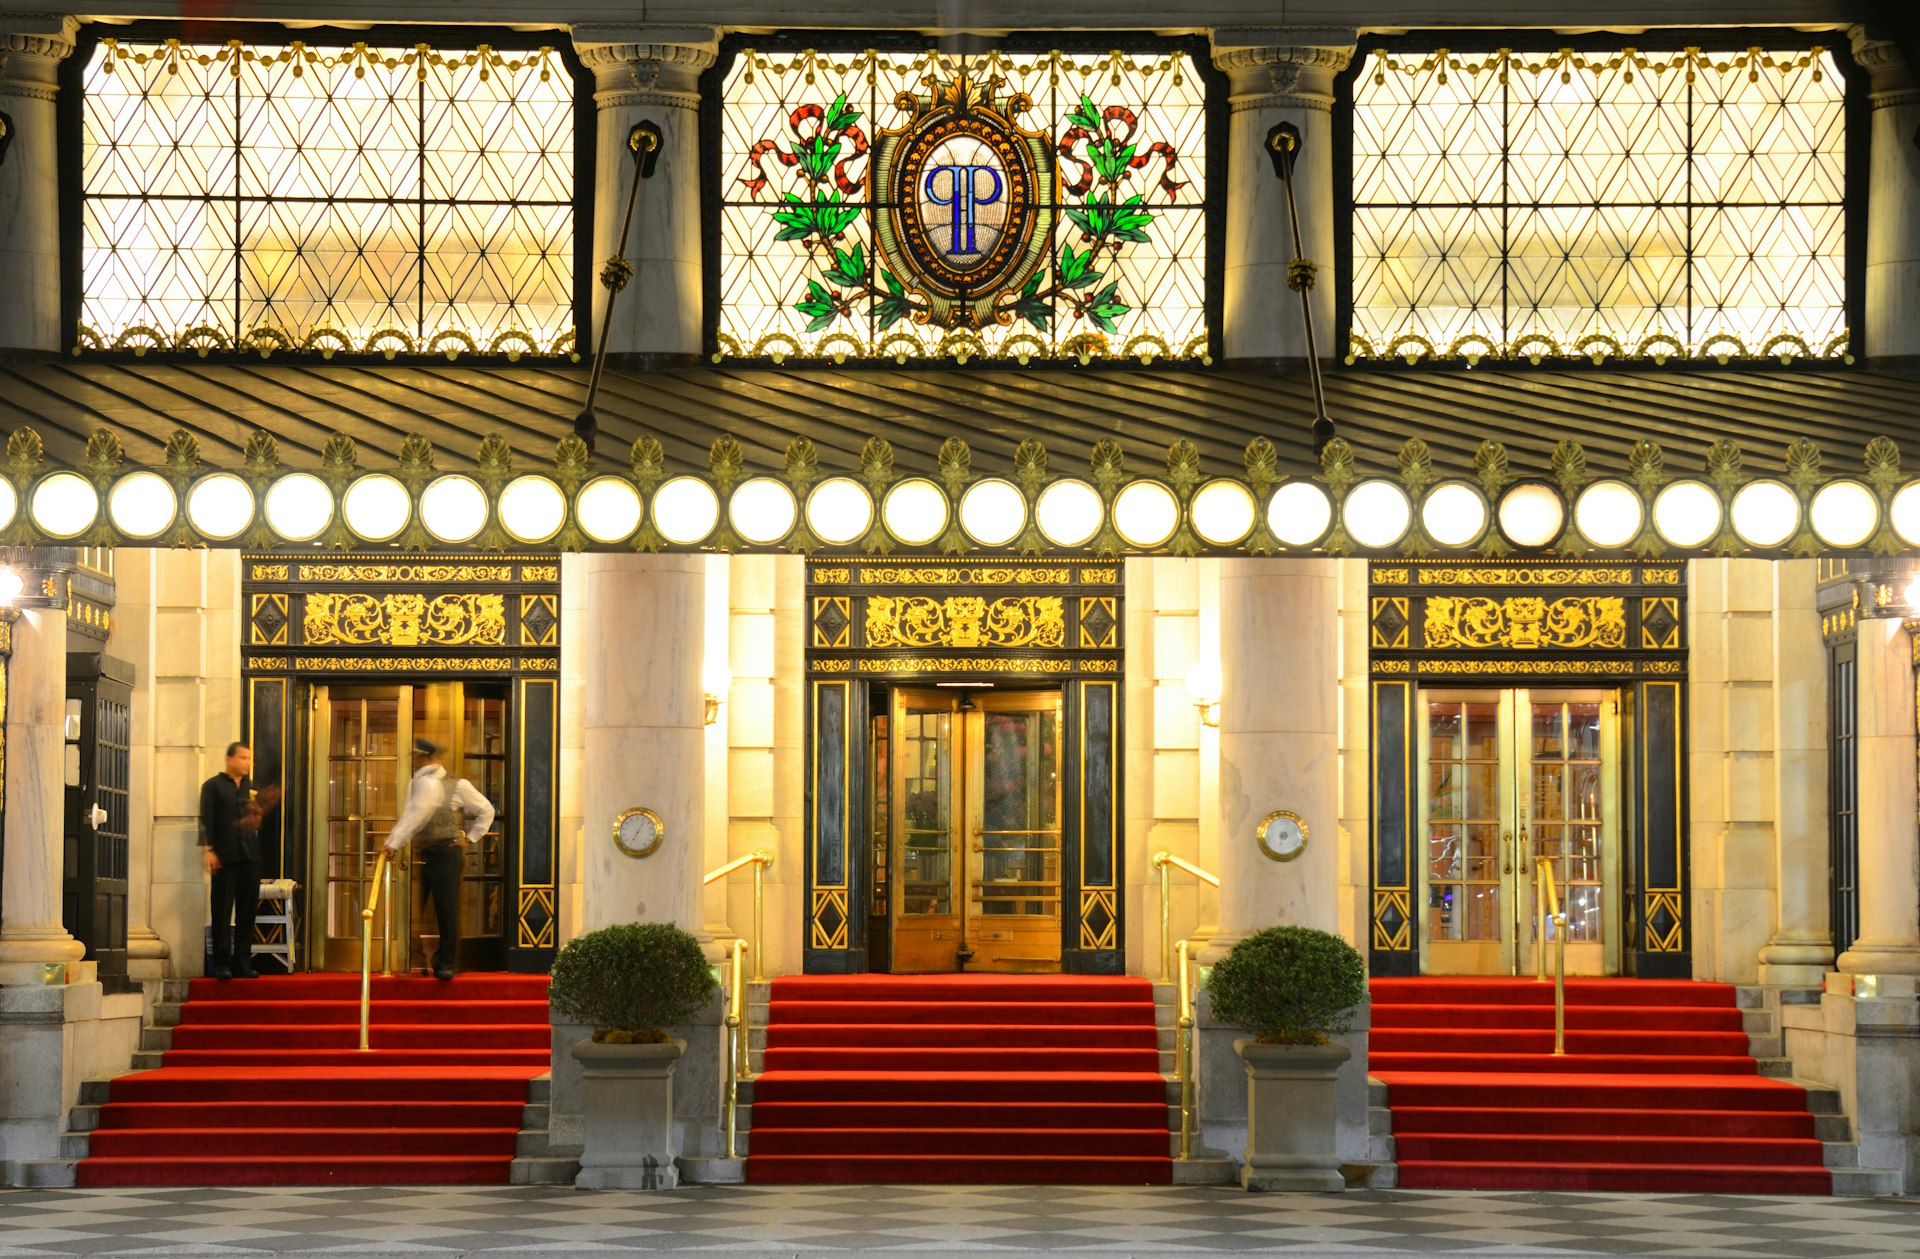 The grand, main entrance of The Plaza Hotel, New York City